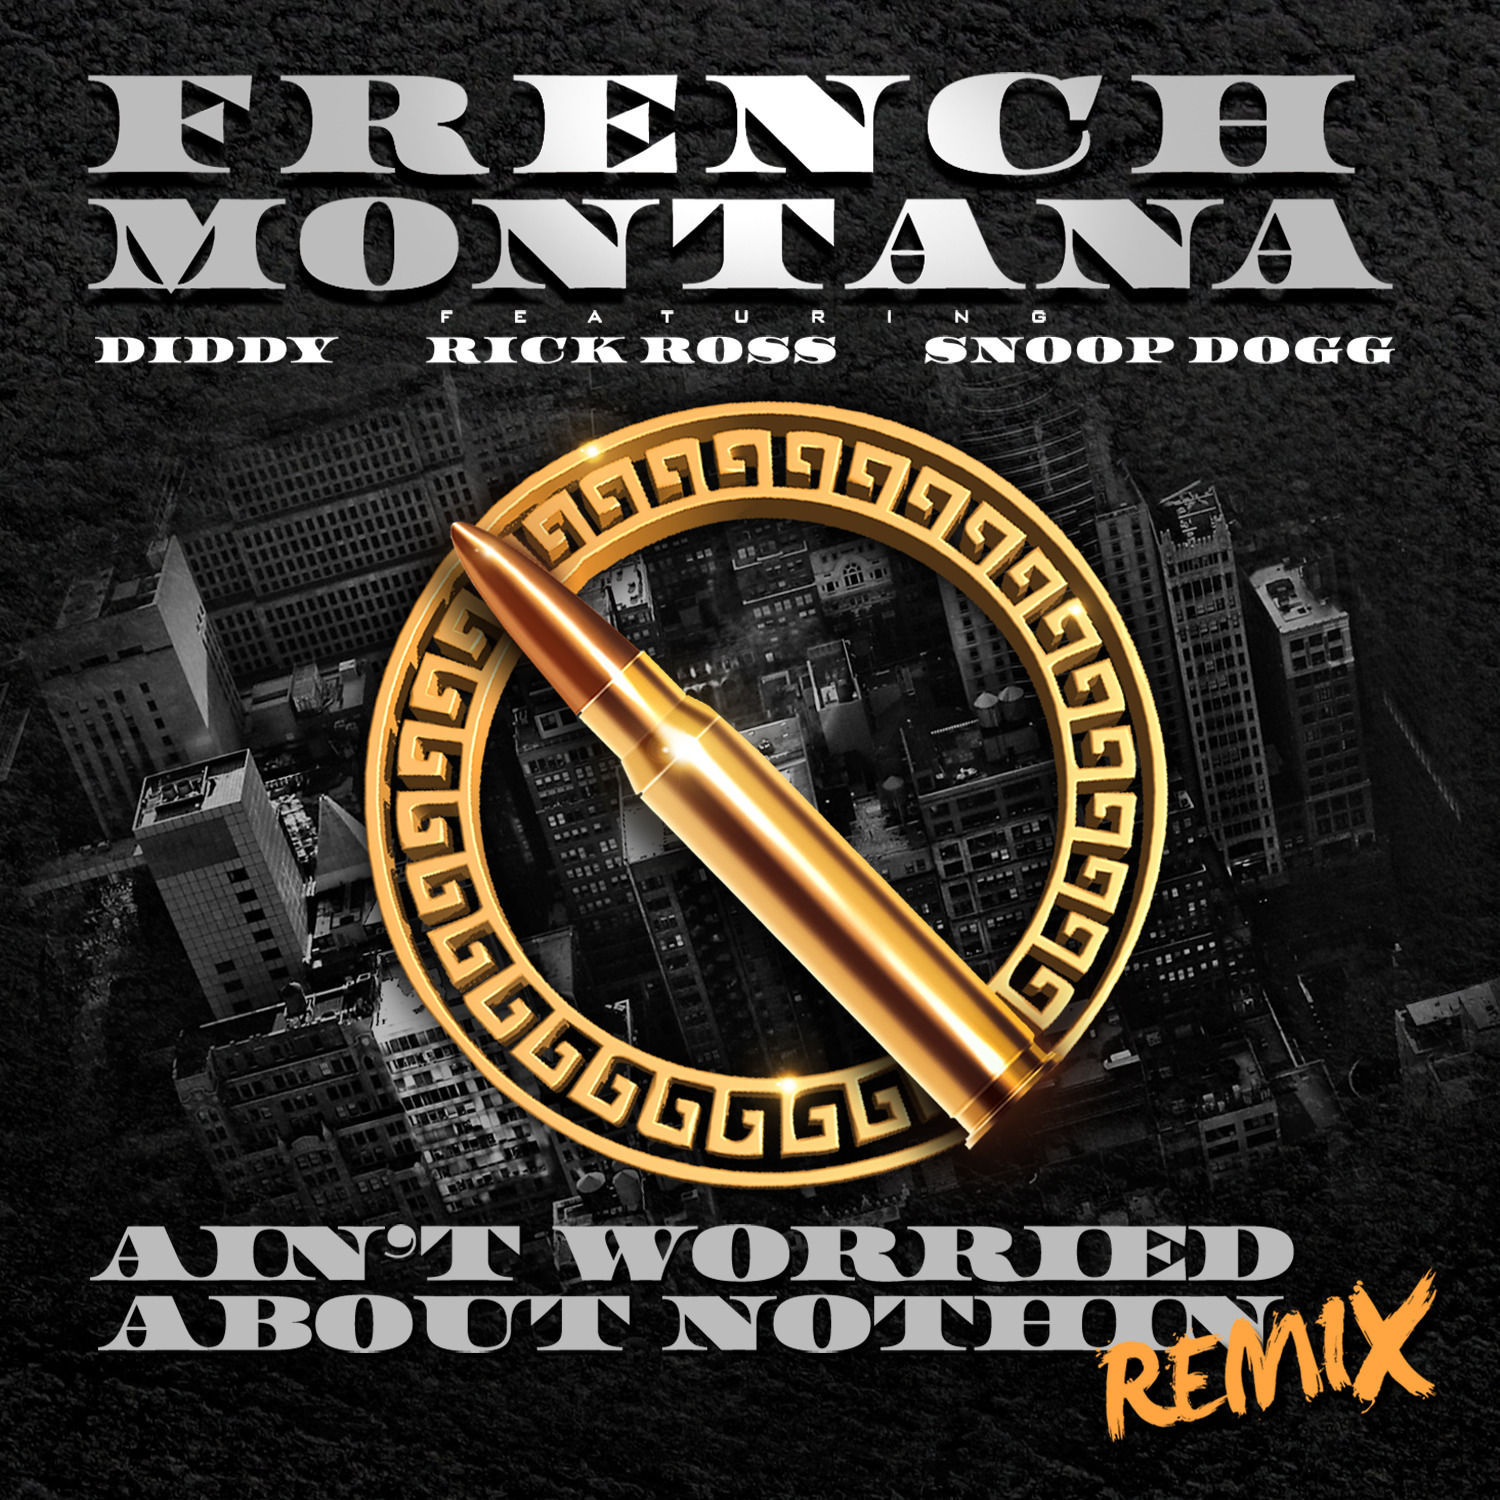 French Montana ft Rick Ross, Diddy & Snoop Dogg - Ain't Worried About Nothin' (Remix)